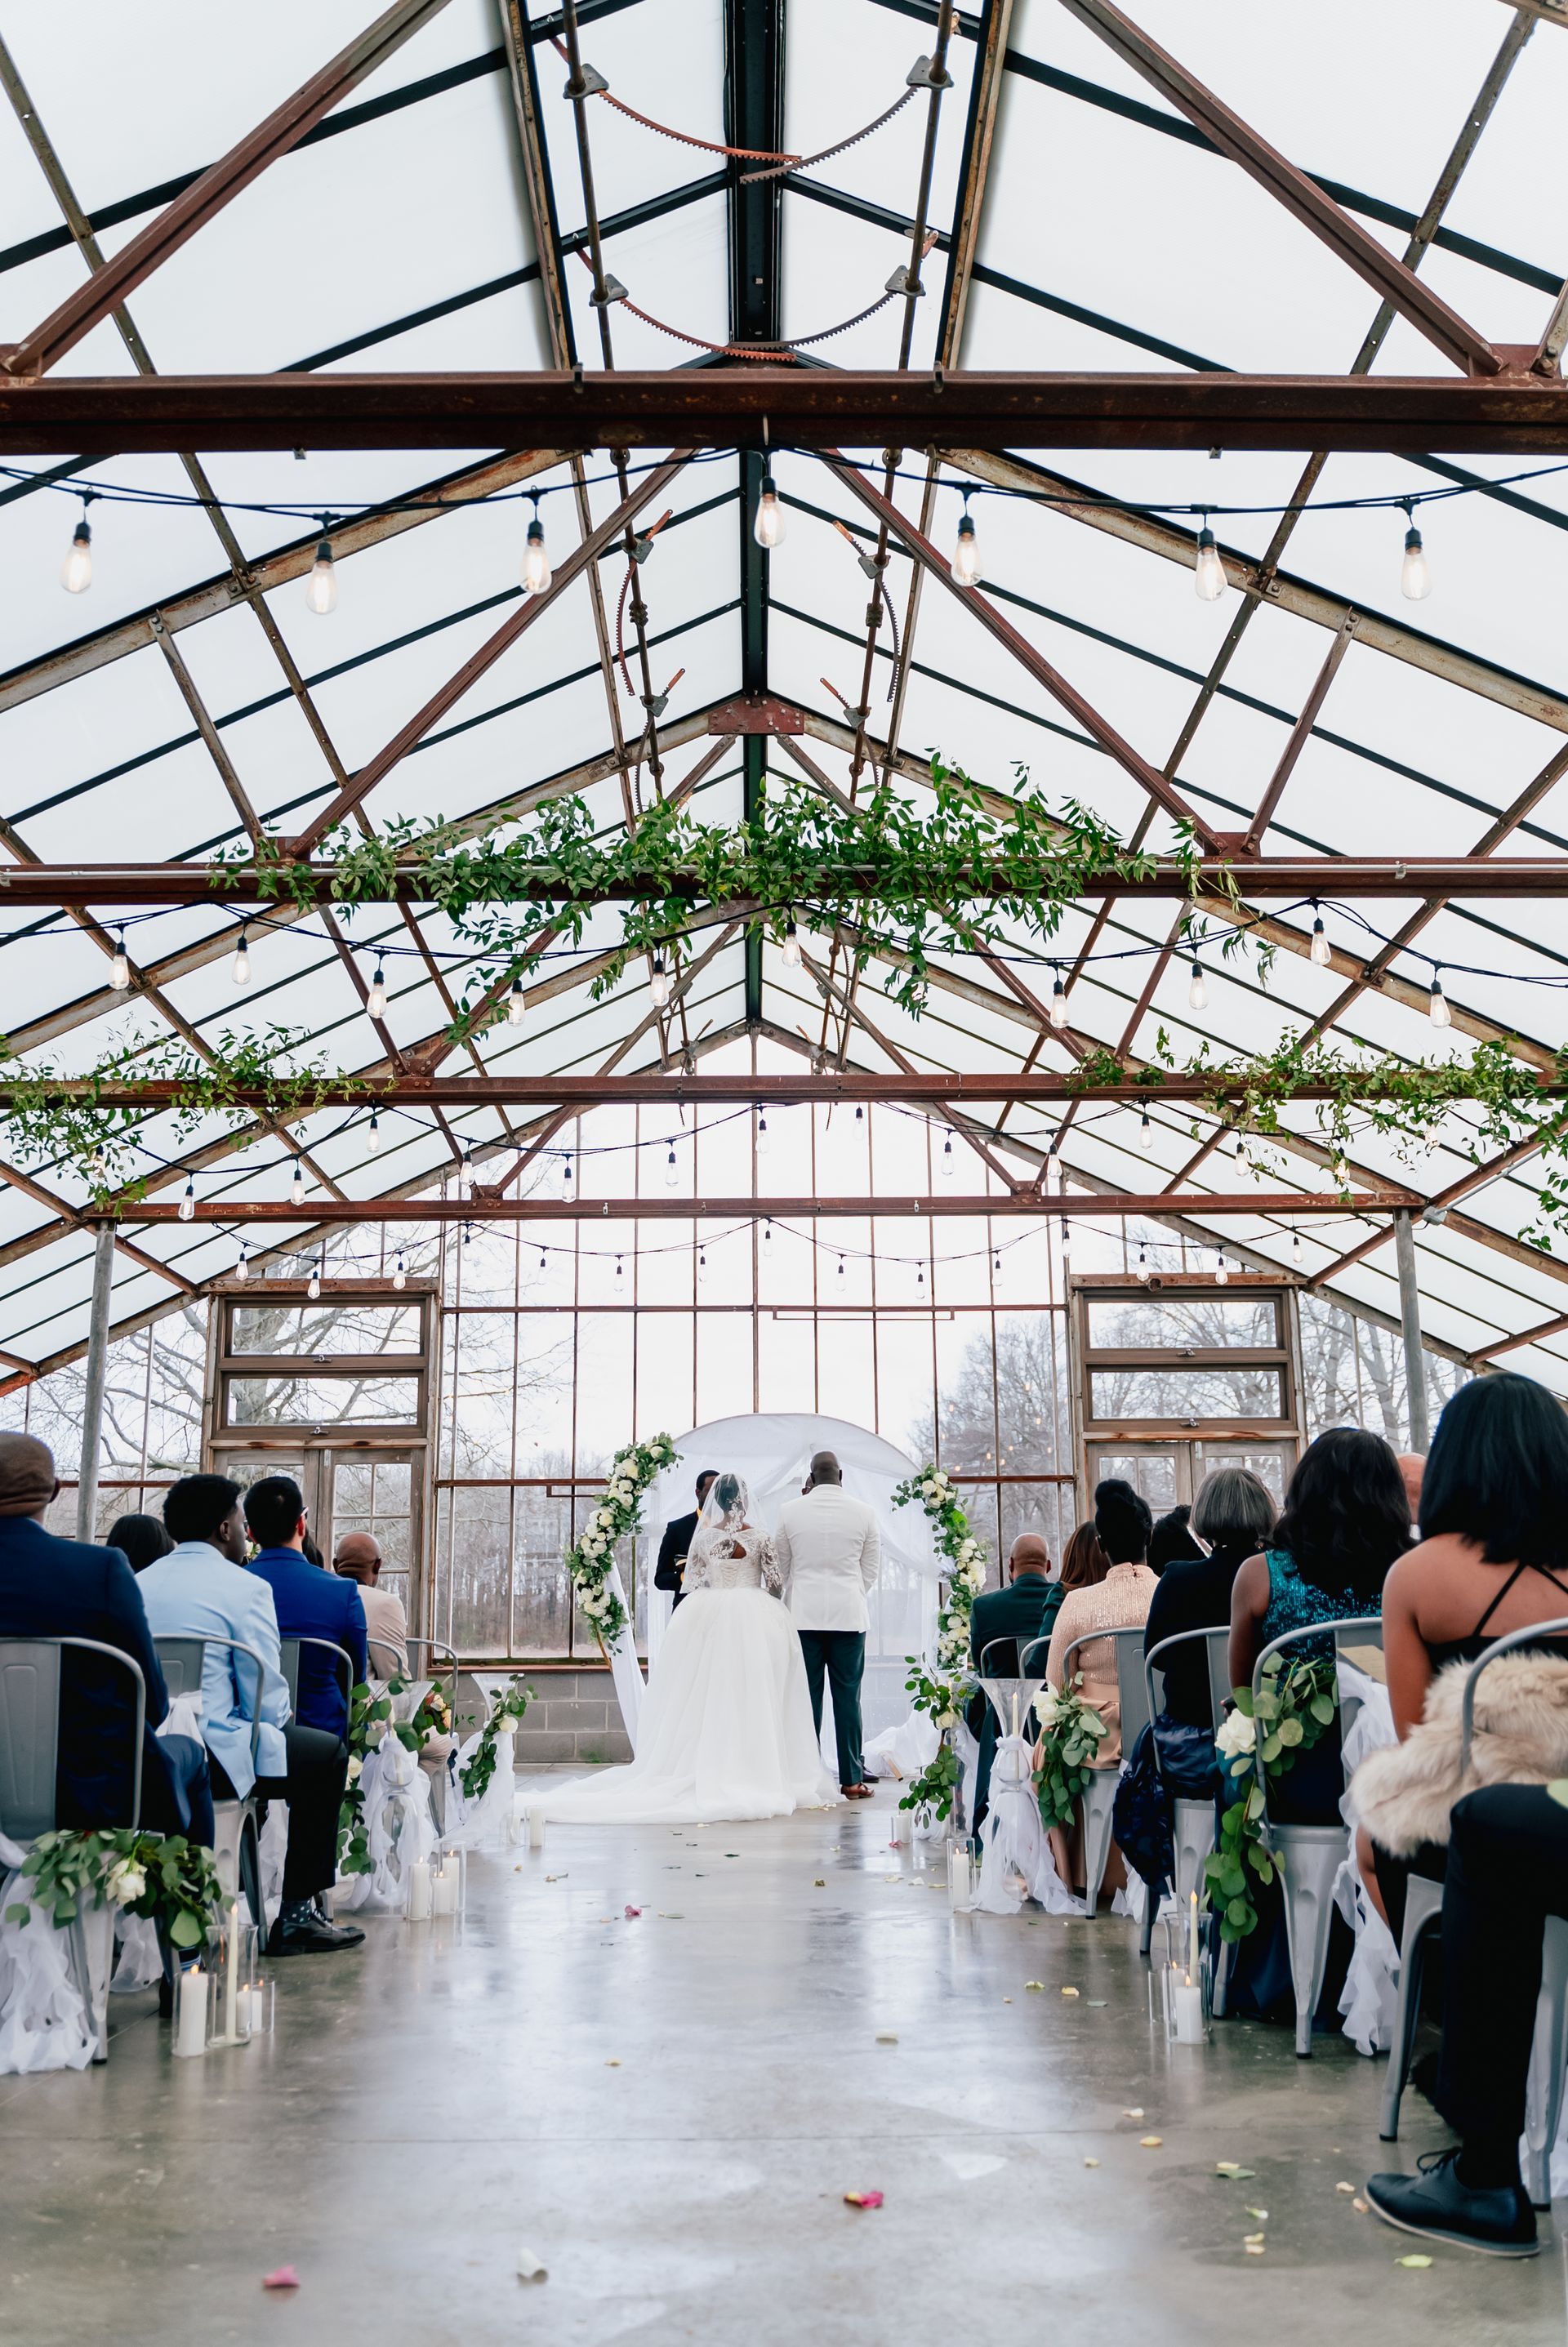 A bride and groom are getting married in a jorgensen farms greenhouse.